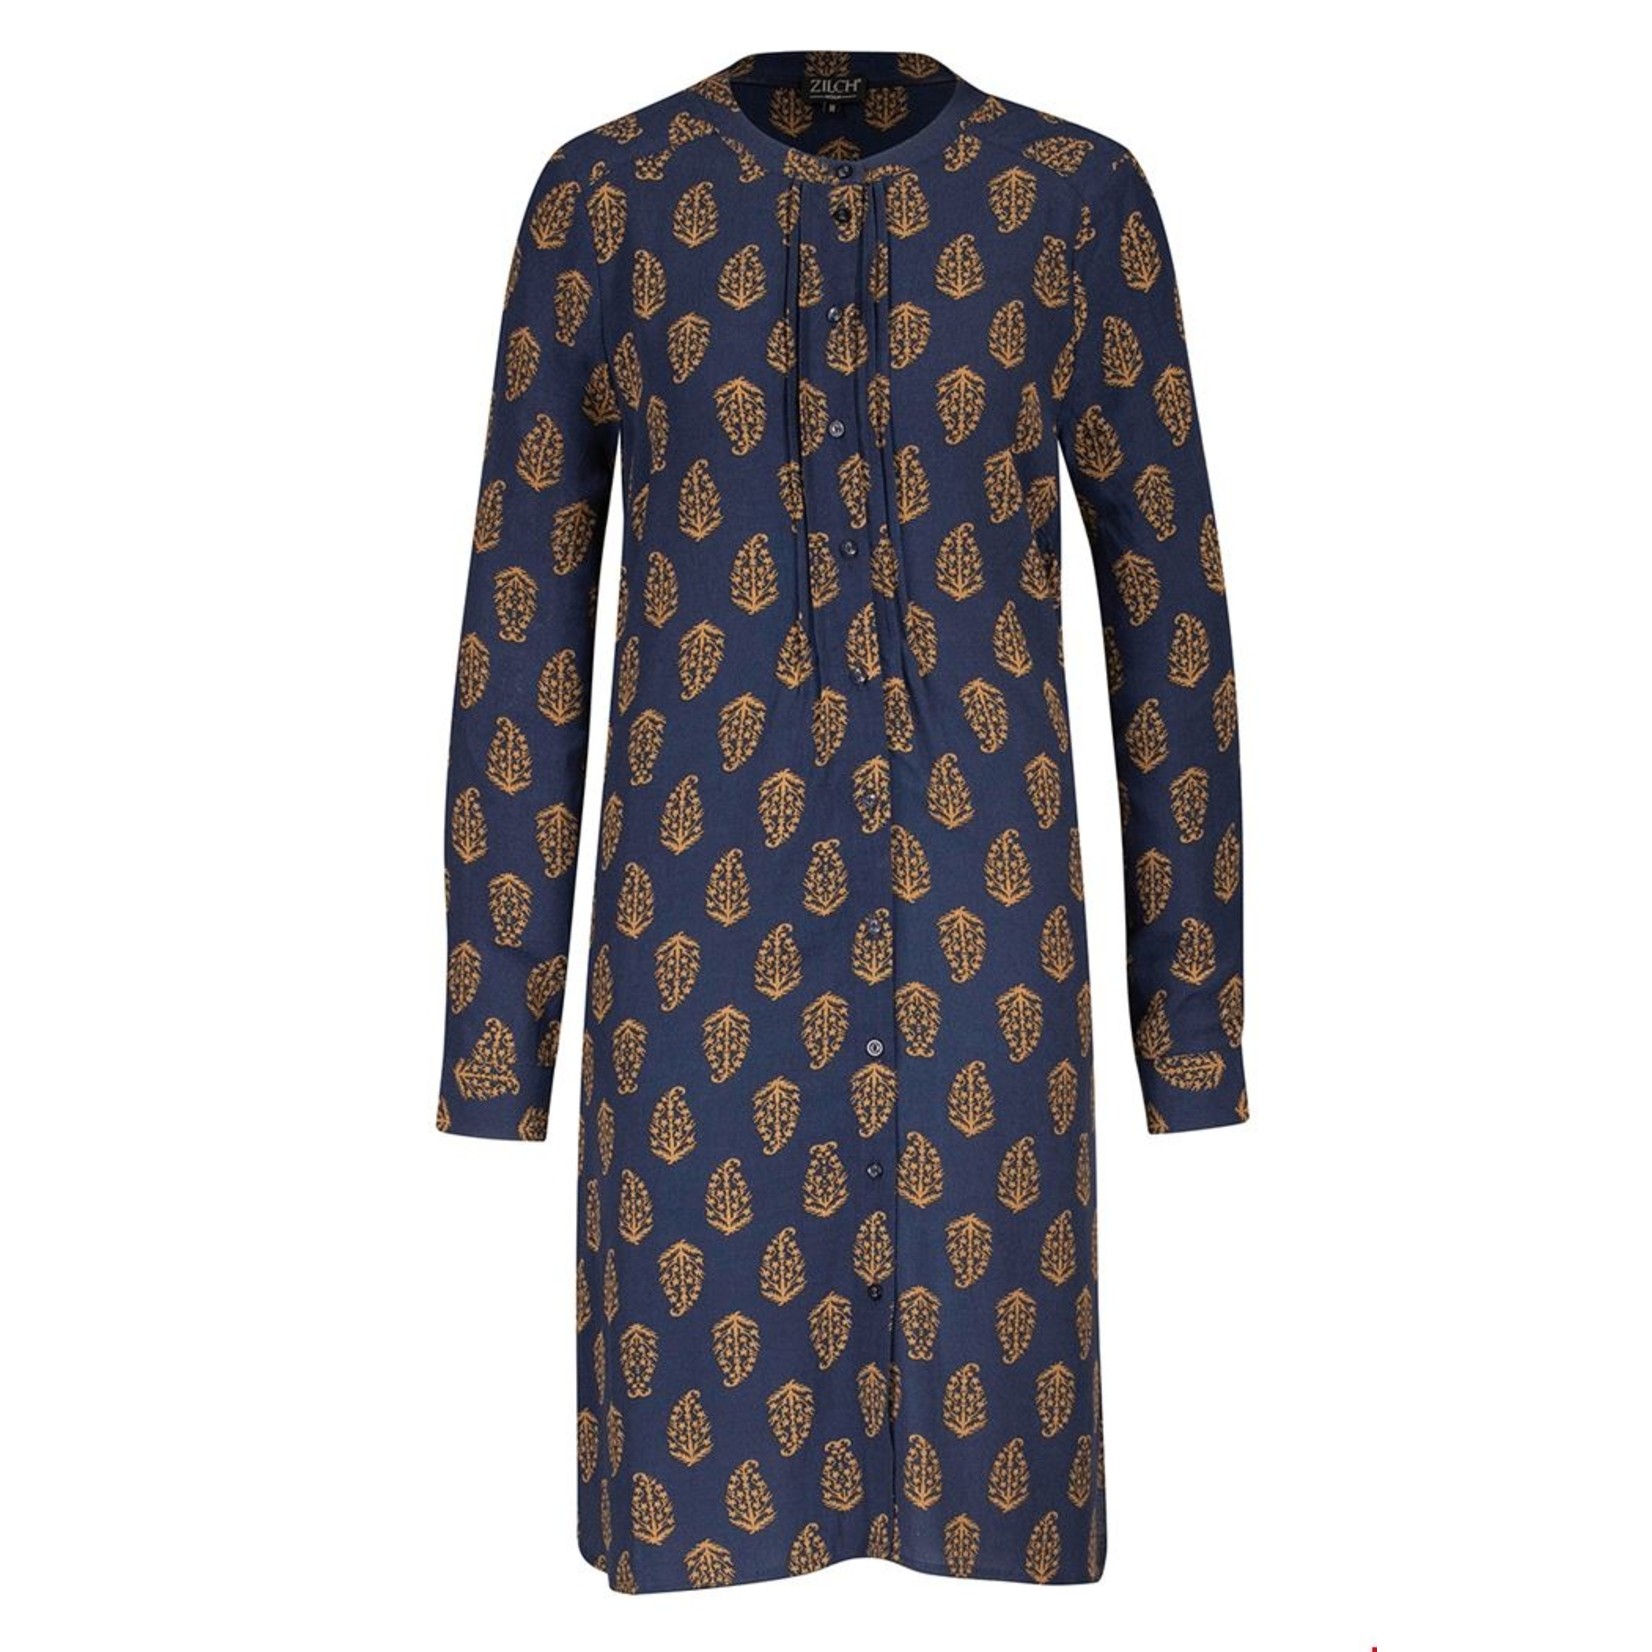 ZILCH - Dress Buttons - paisley navy